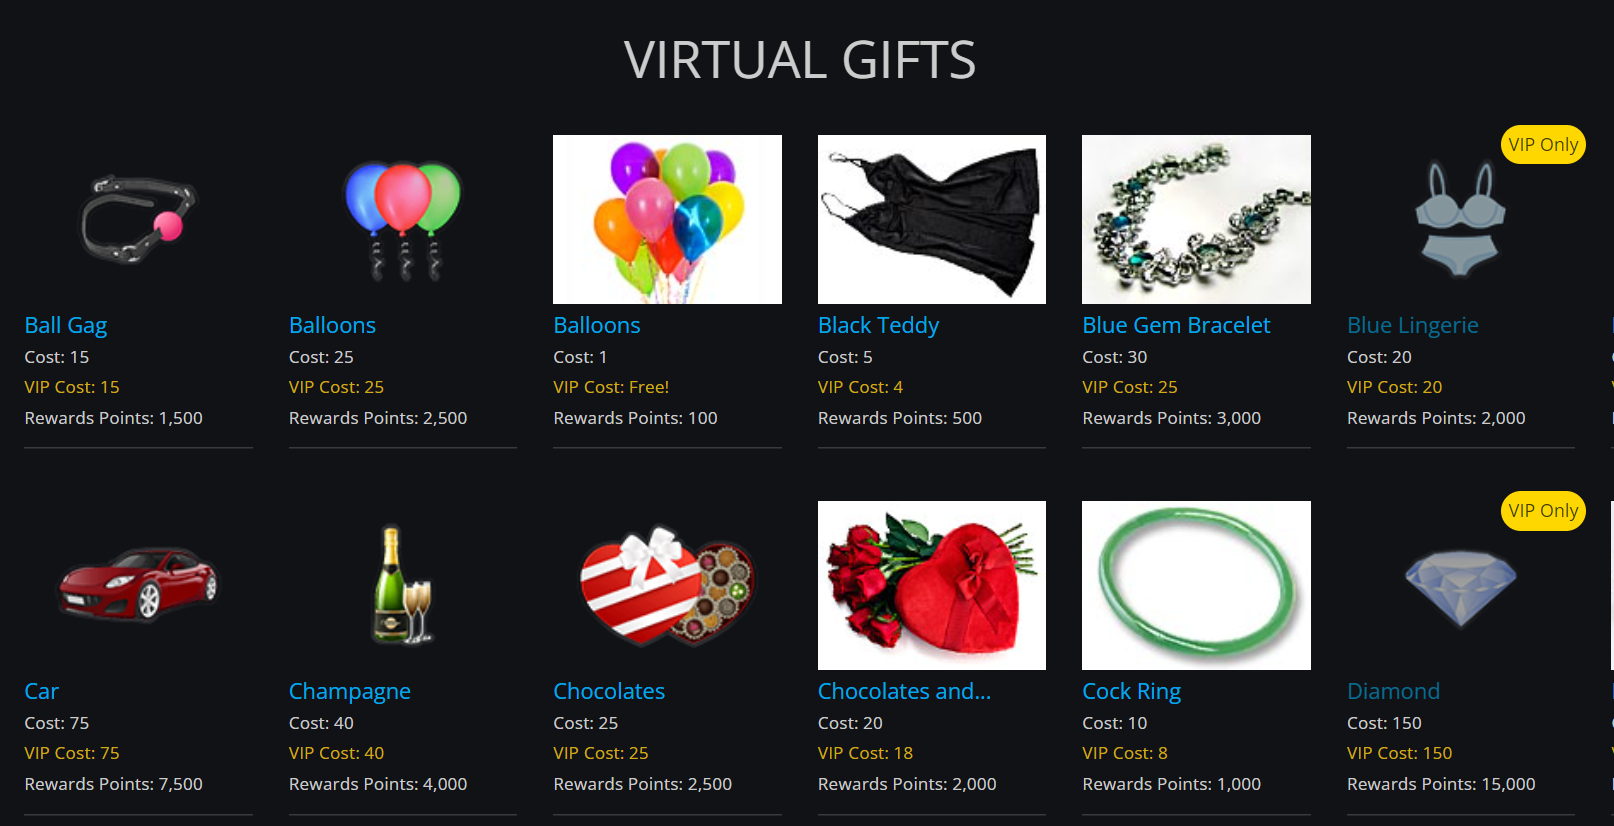 Example of the virtual gifts available on Flirt4Free